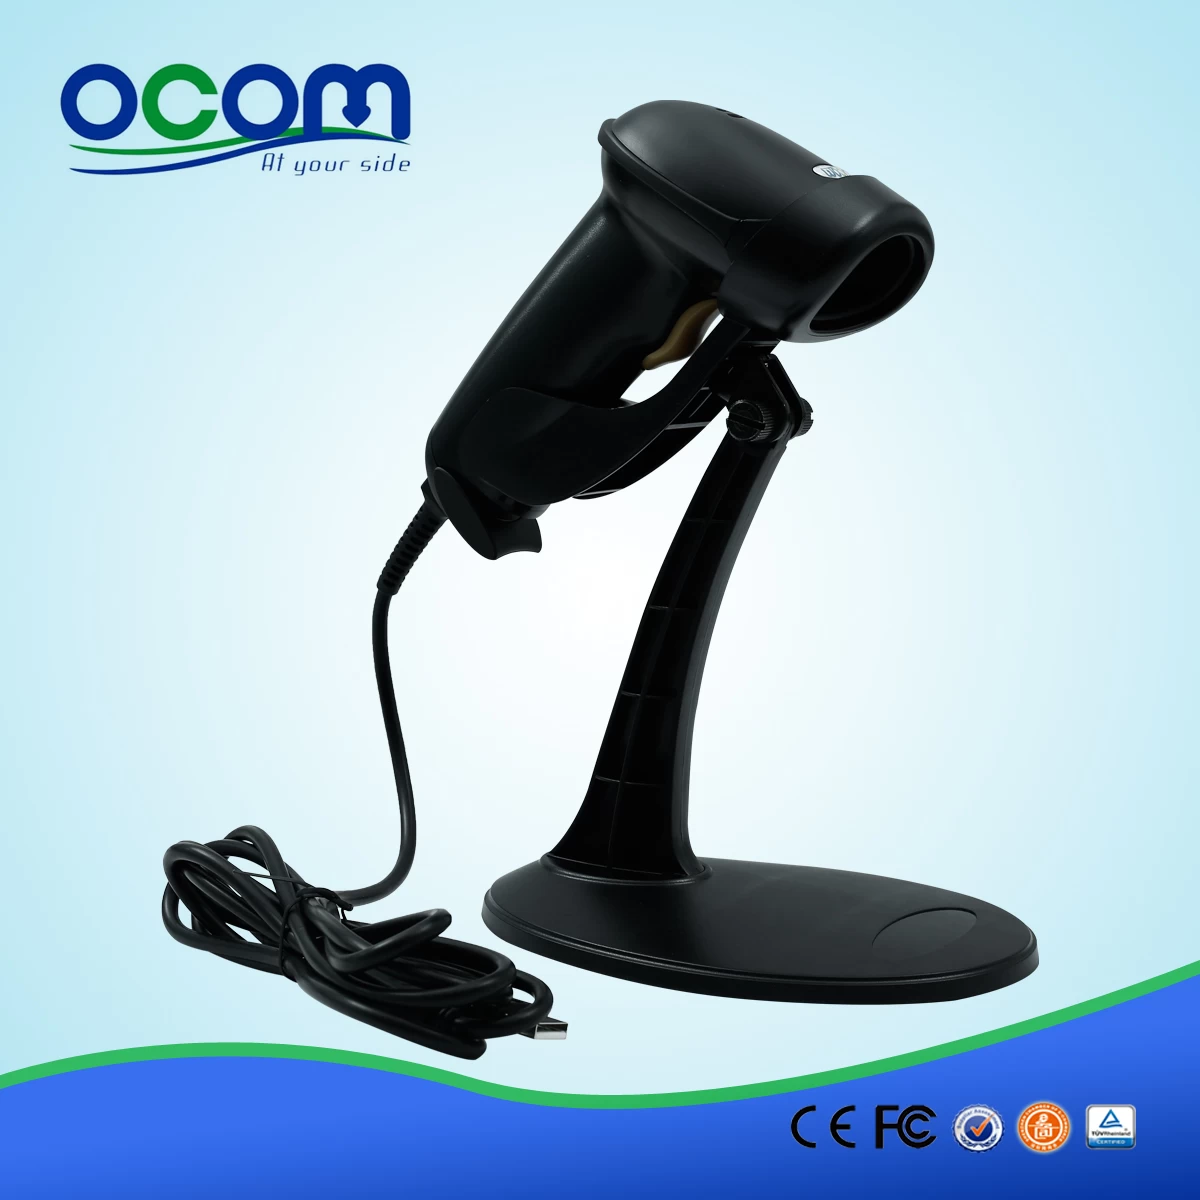 Portable auto barcode scanner 1D Barcode Scanner for POS System (OCBS-LA04)